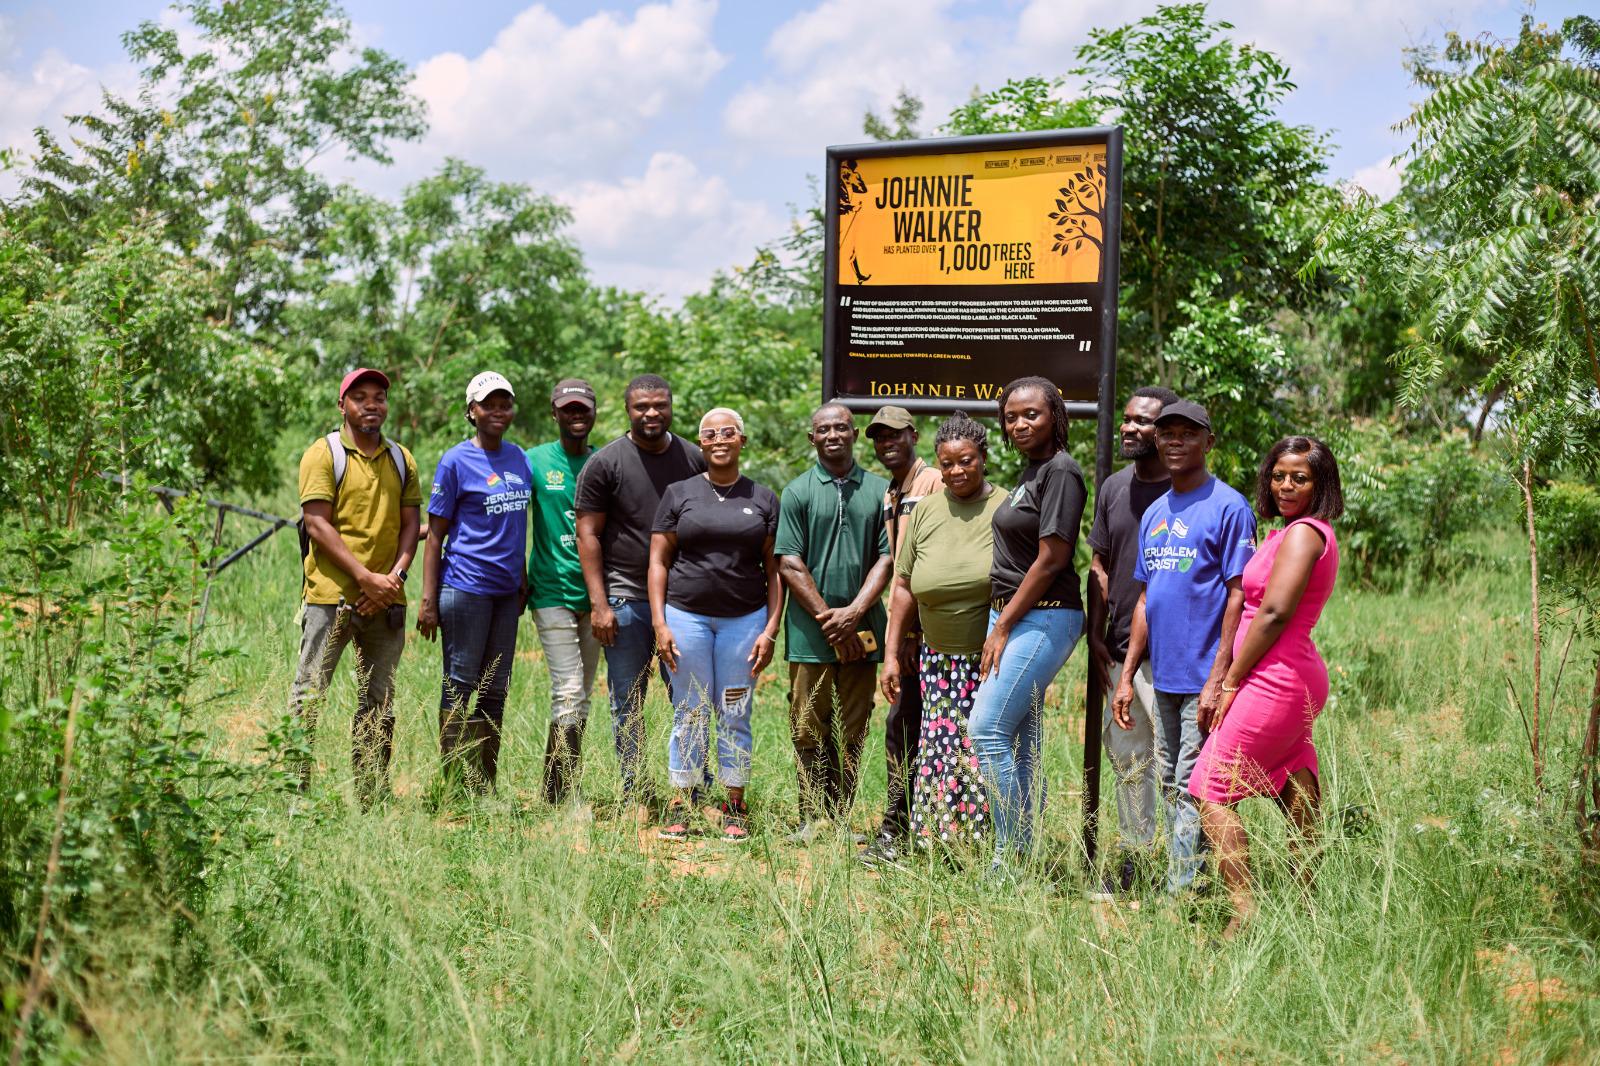 Stepping into a greener future one tree at a time; Johnnie Walker’s commitment to environmental sustainability